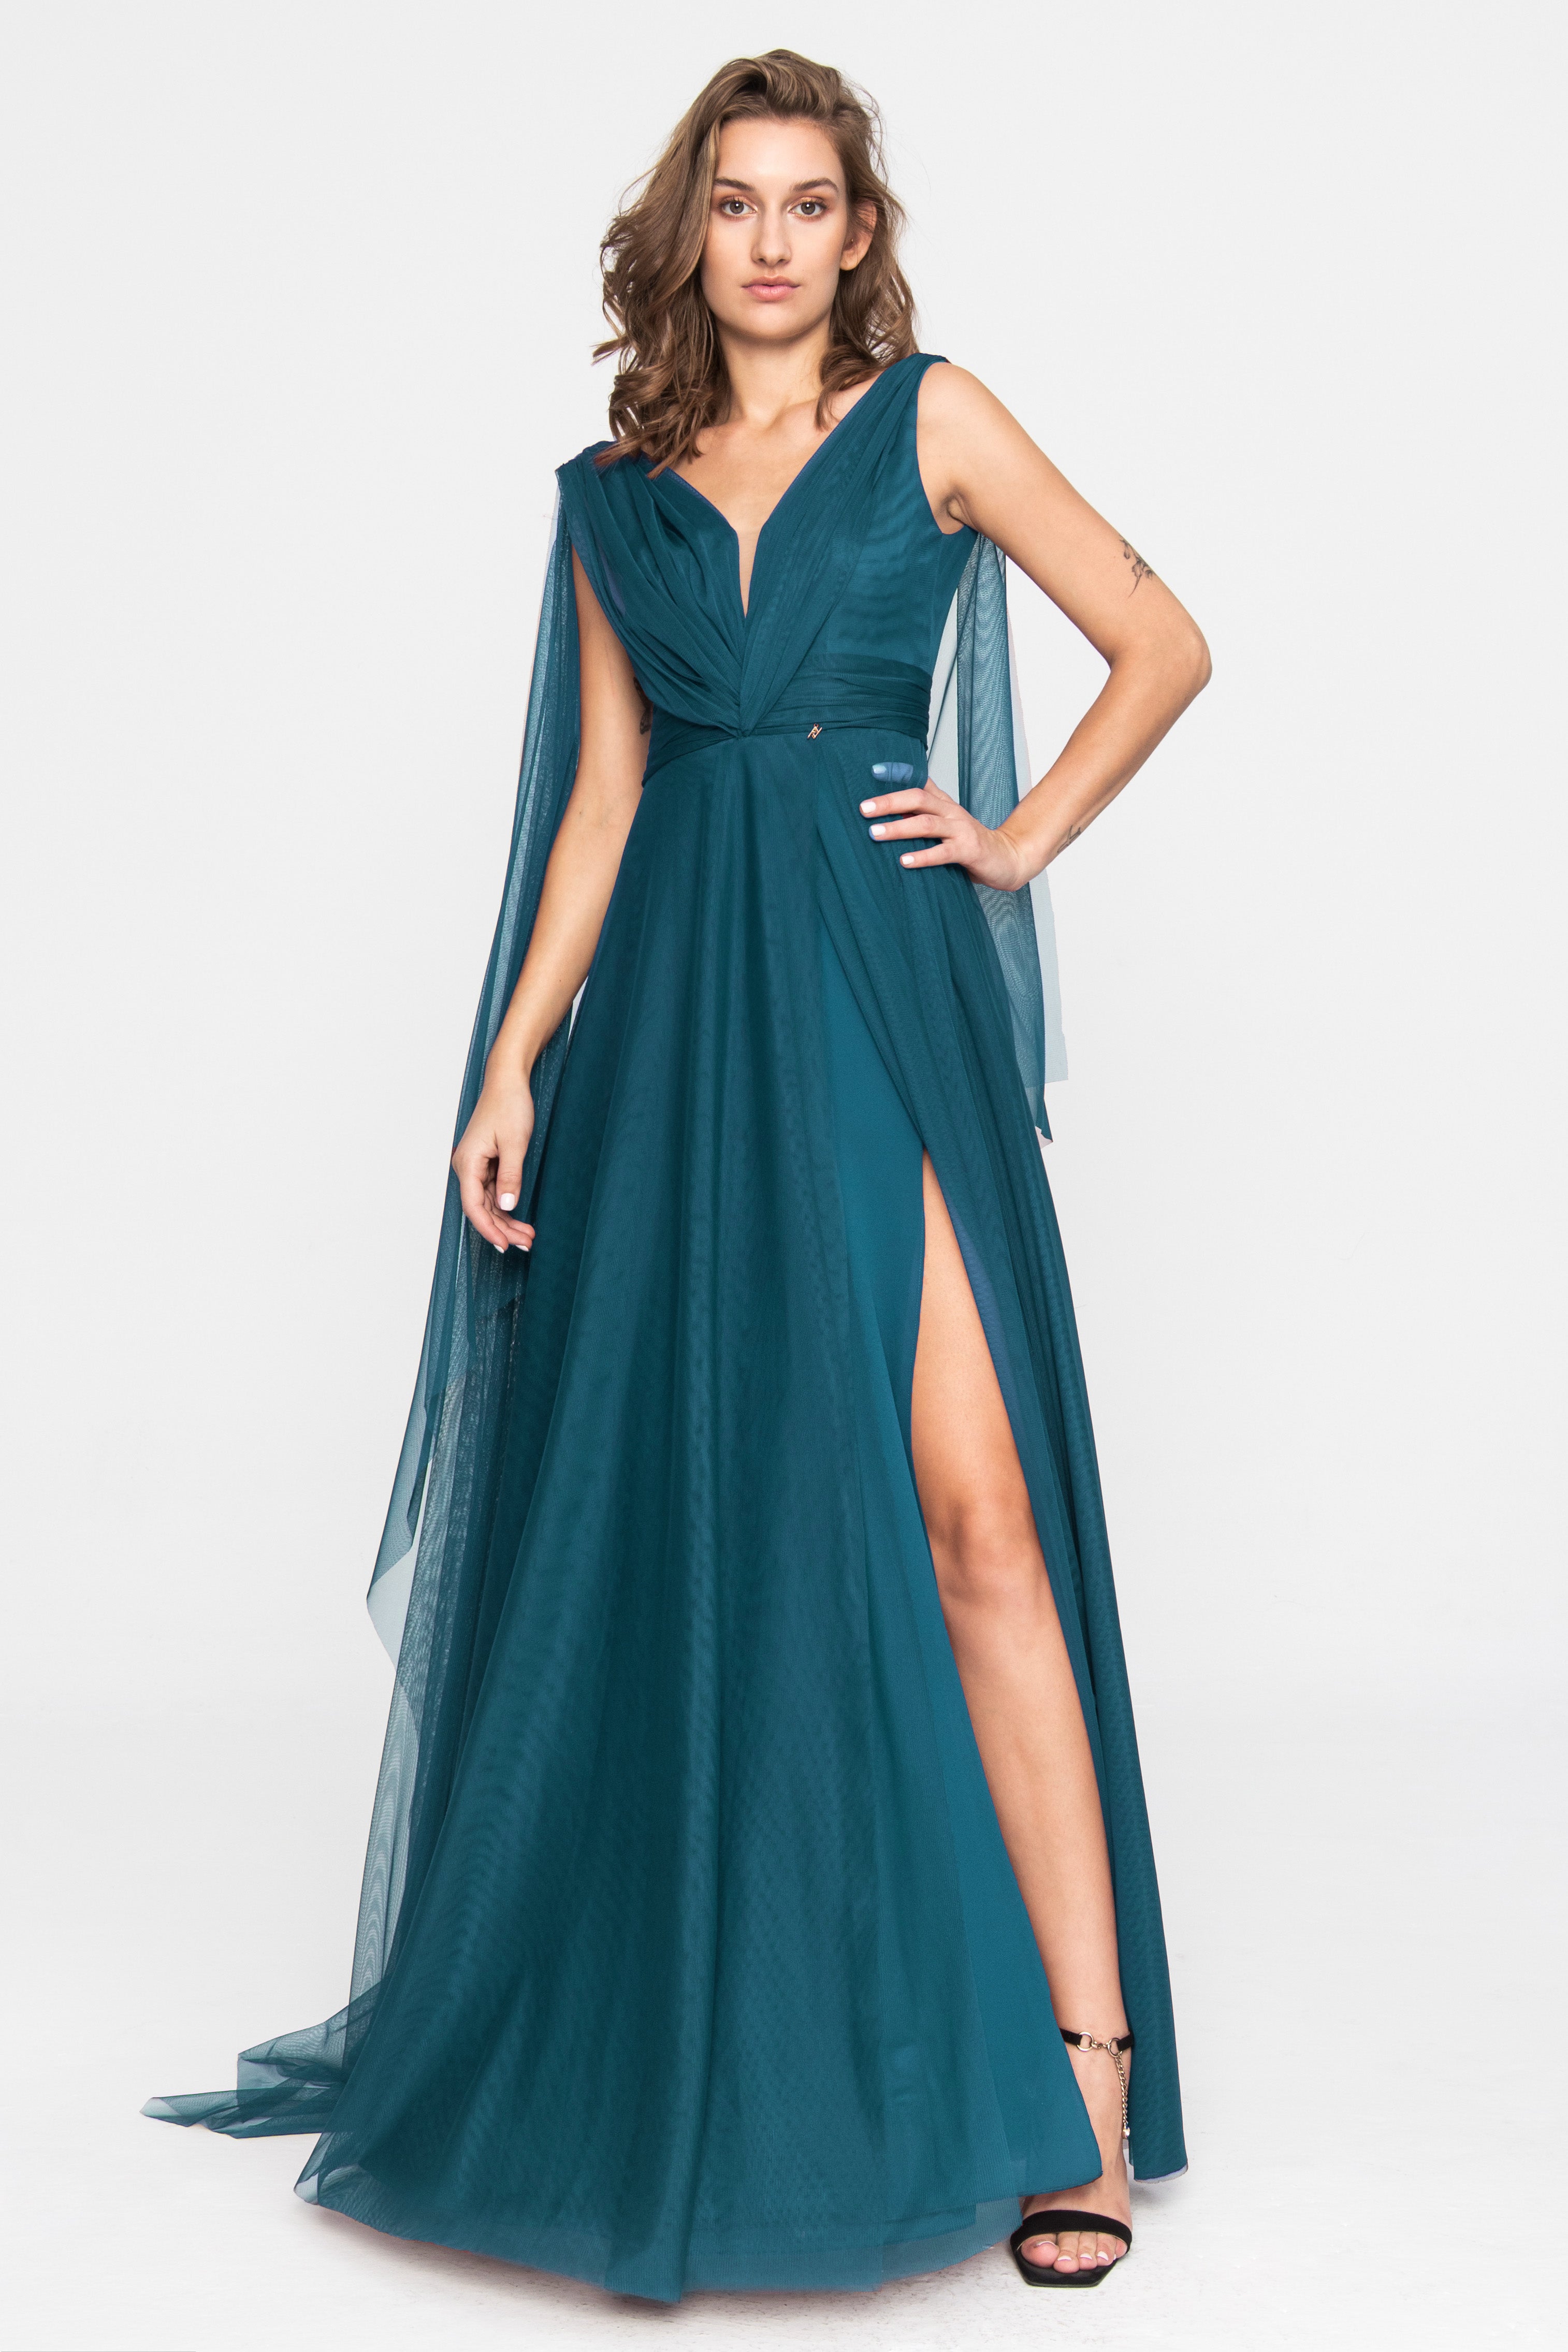 Tulle Terracotta Evening Gown Petrol blue